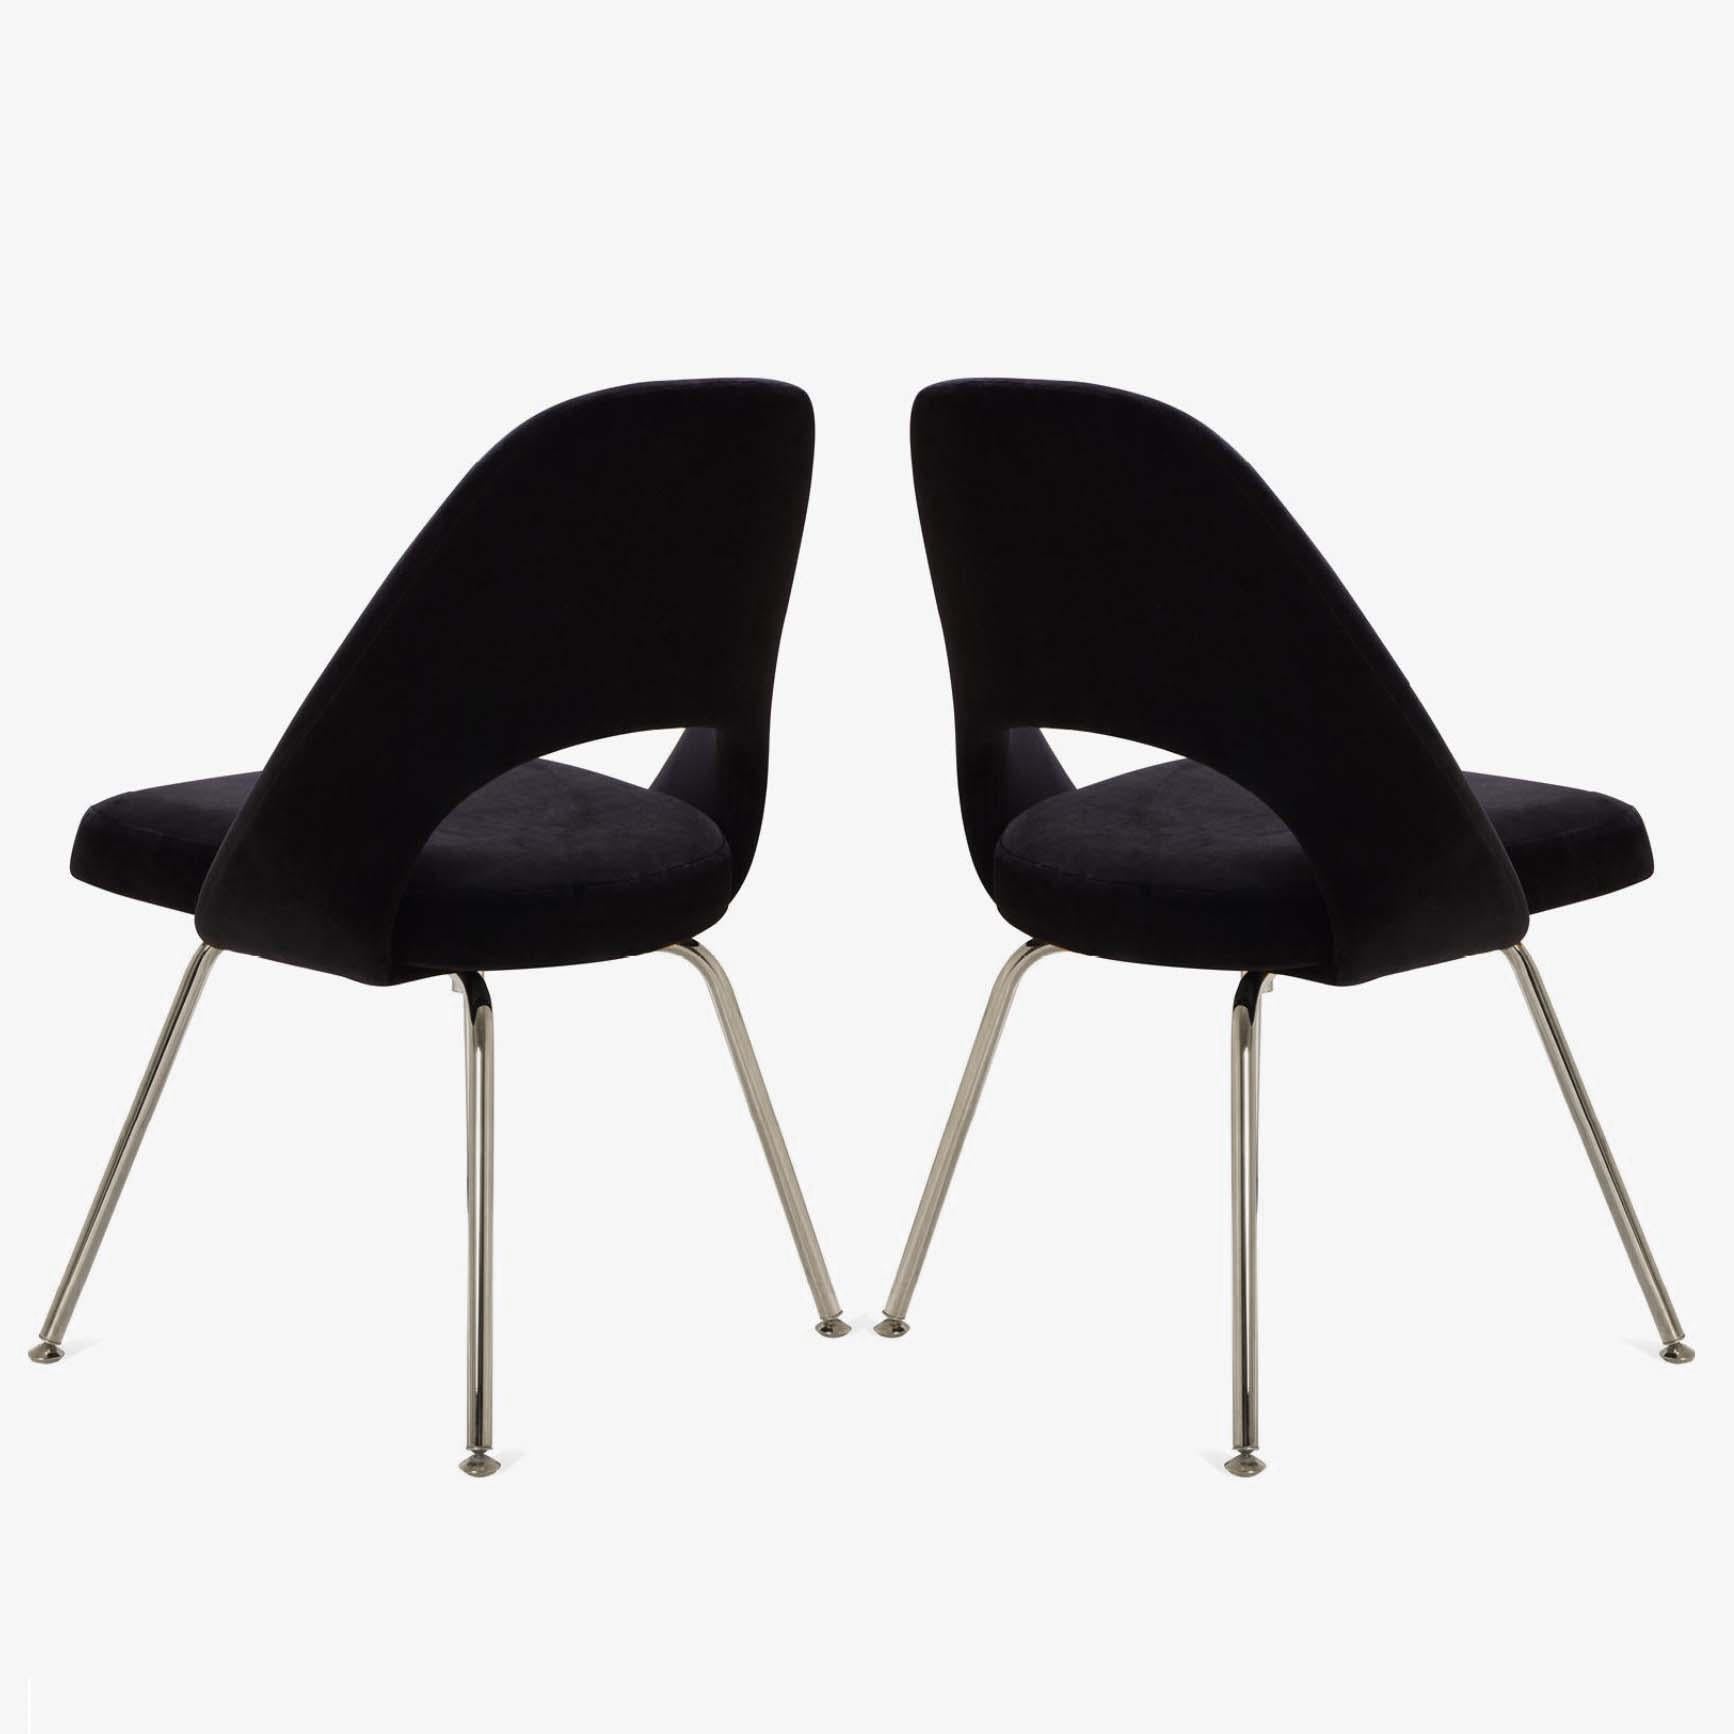 The next generation of Eero Saarinen's famed executive chairs have arrived, 100% authentic Eero Saarinen for Knoll Executive Chairs completely restored ground-up

We've been restoring Saarinen Executive Chairs for years in every fabric one can